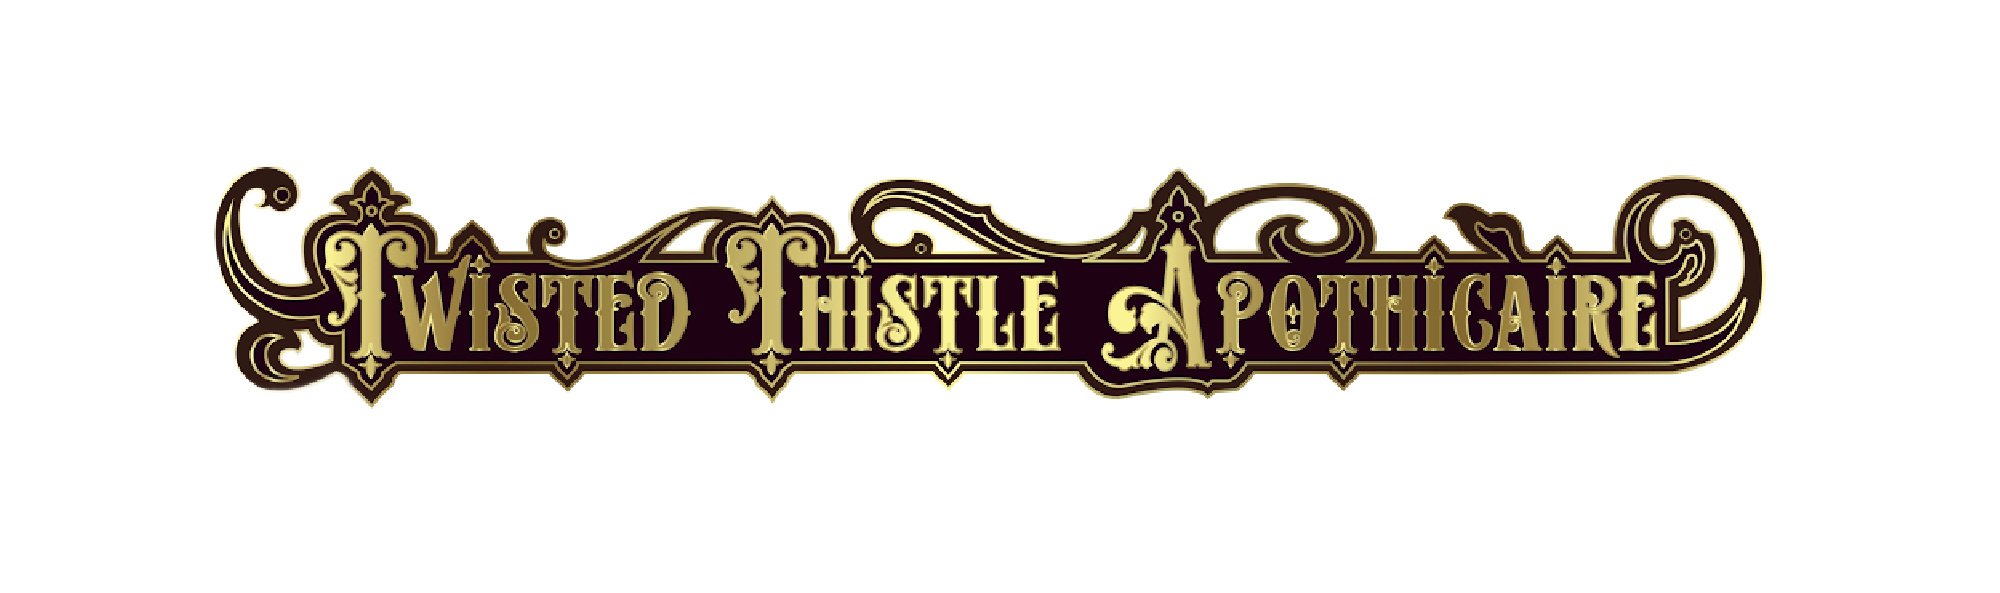 image of twisted thistle apothecary where you can buy kratom in san francisco california